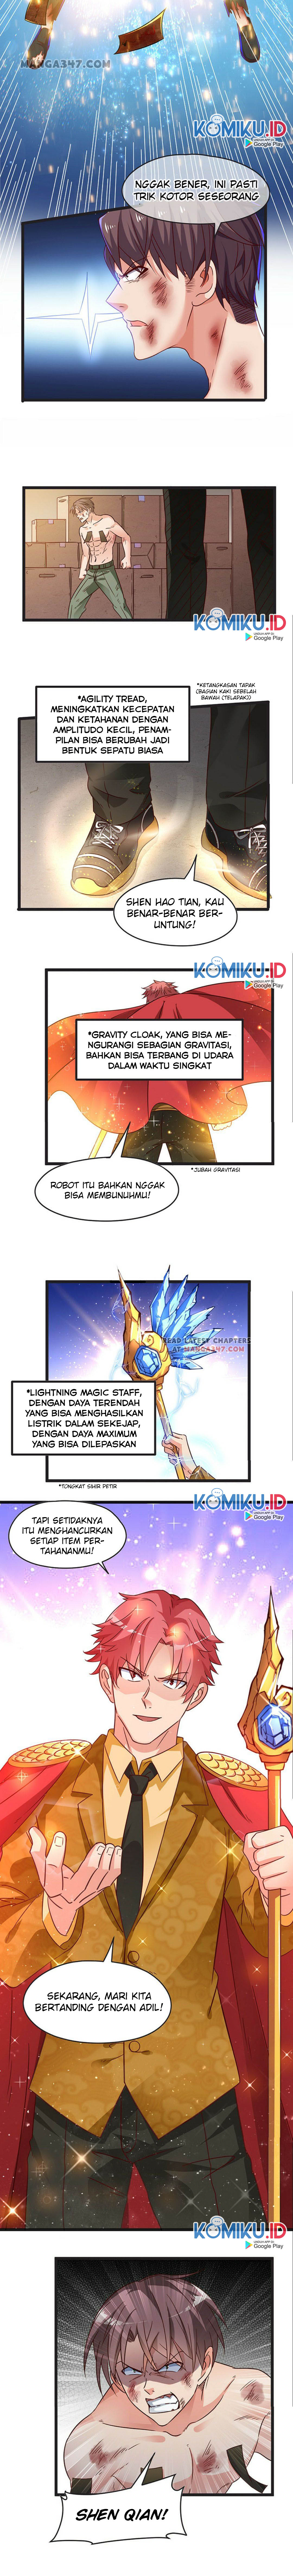 Gold System Chapter 38 12